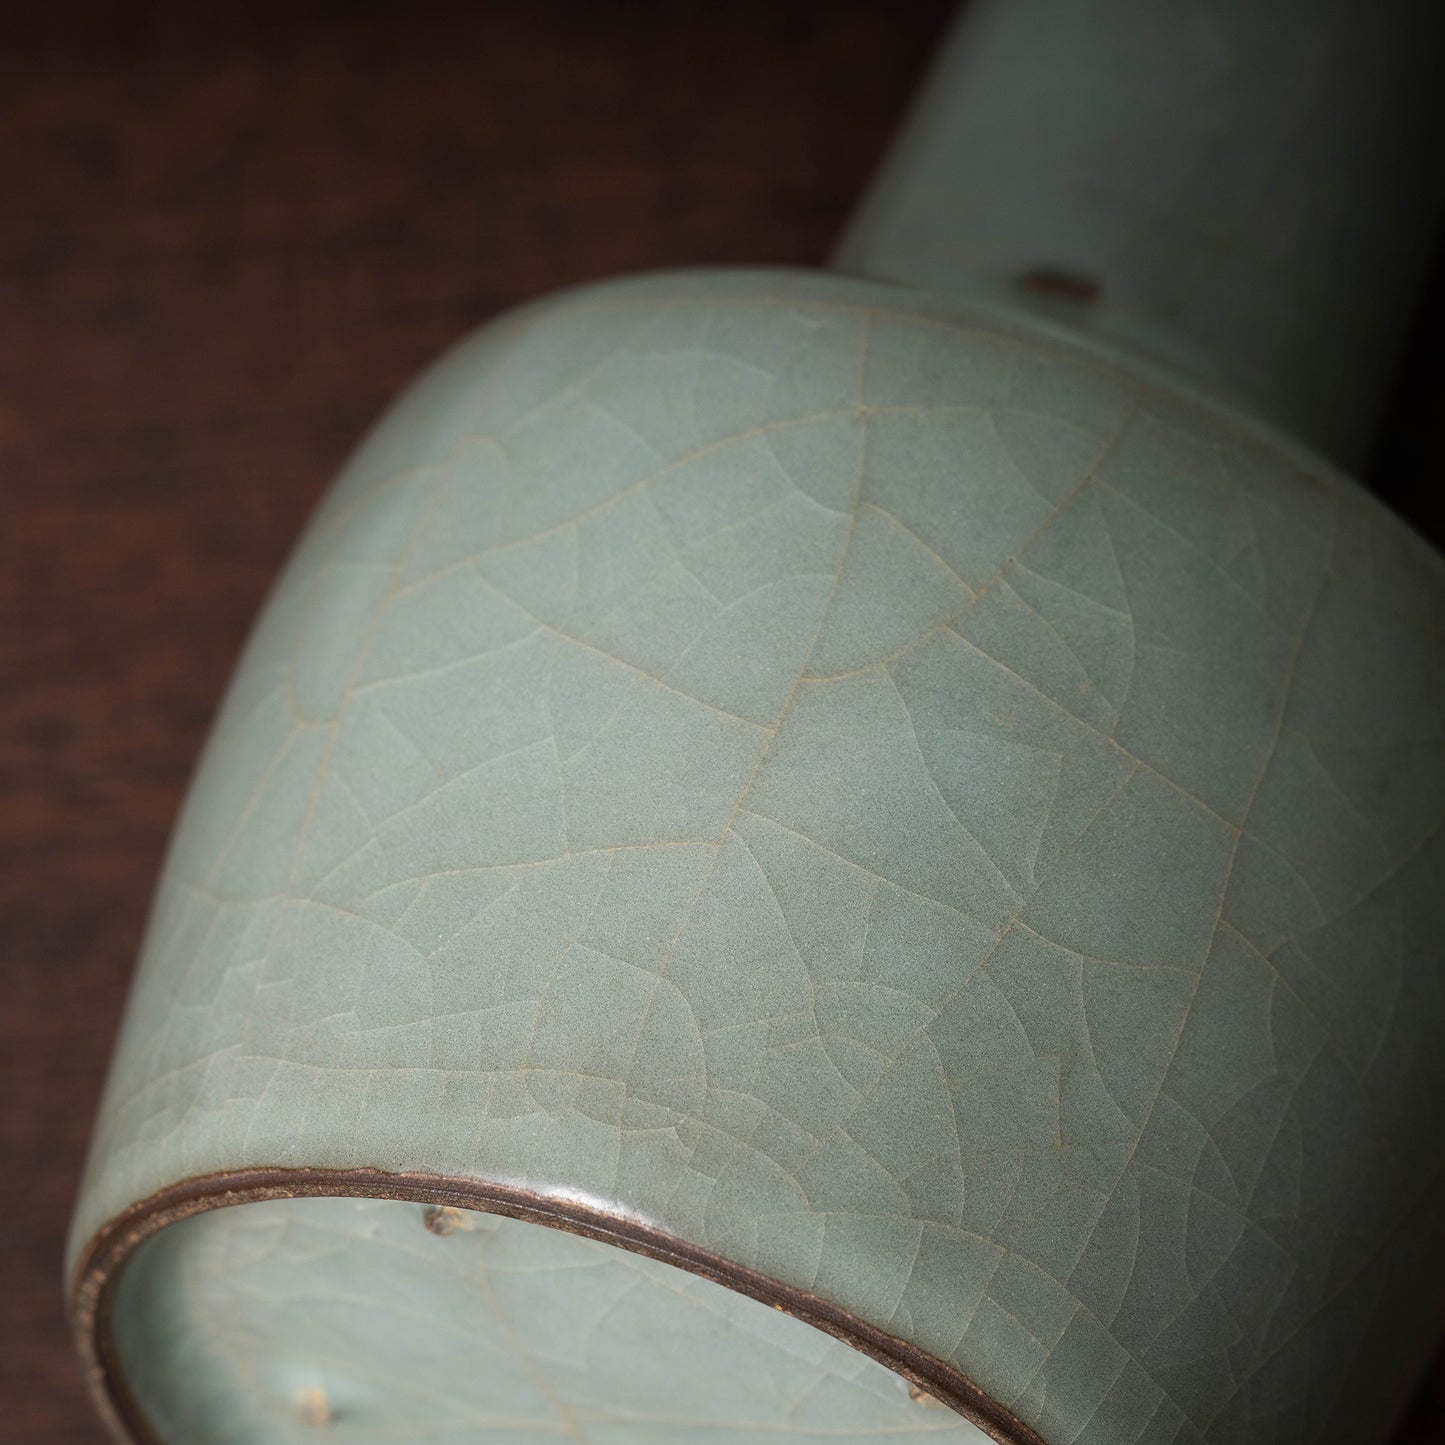 Southern Song Dynasty Guan ware Celadon Vase with Plate-like Mouth